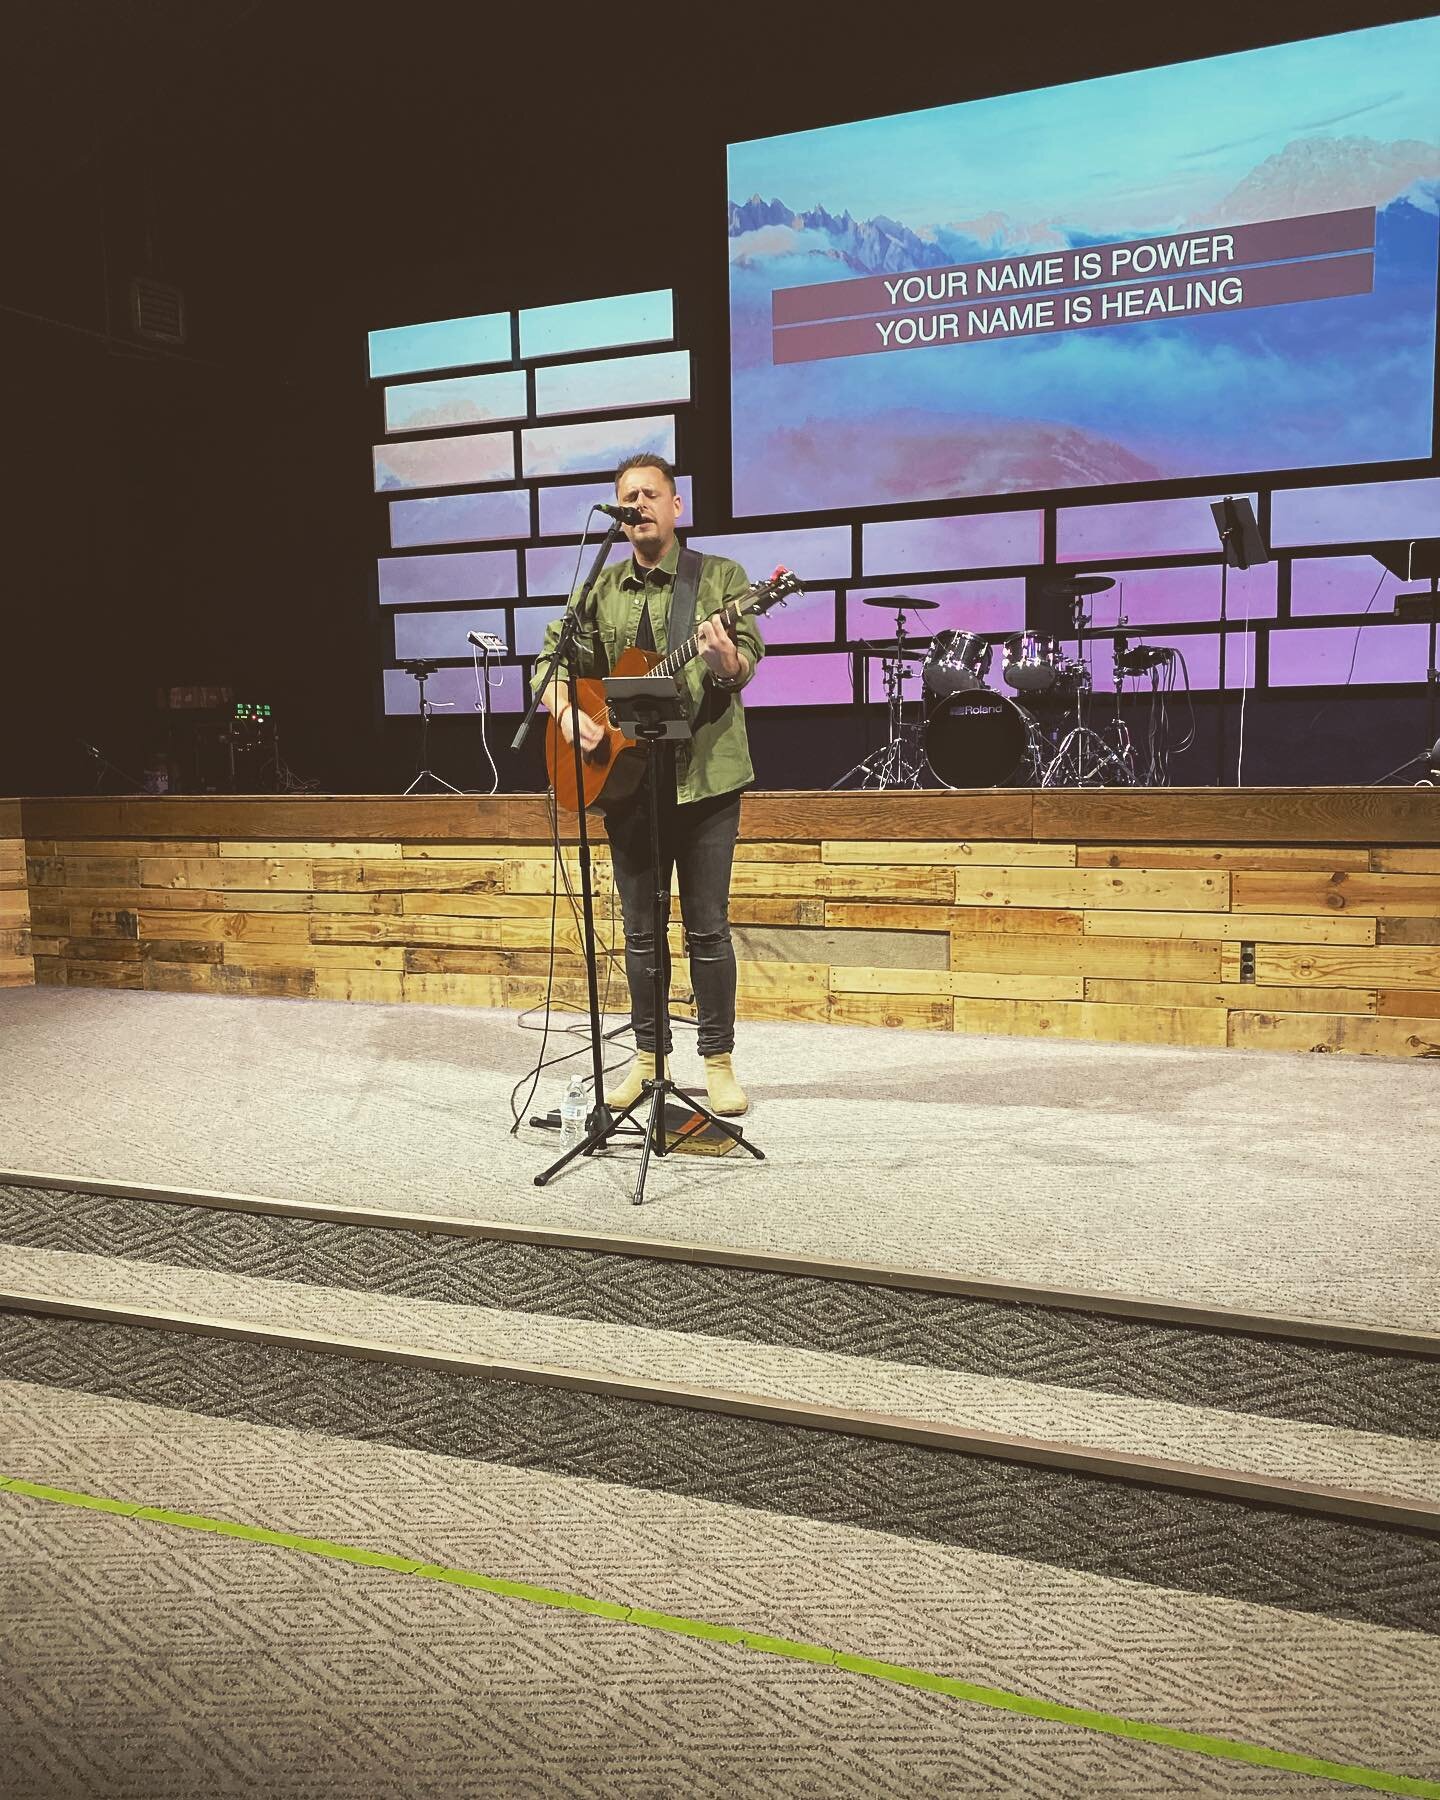 I had a great time leading worship and sharing some original songs this morning @movementoutreach in Newville, PA! Thanks for the invite! 🙌